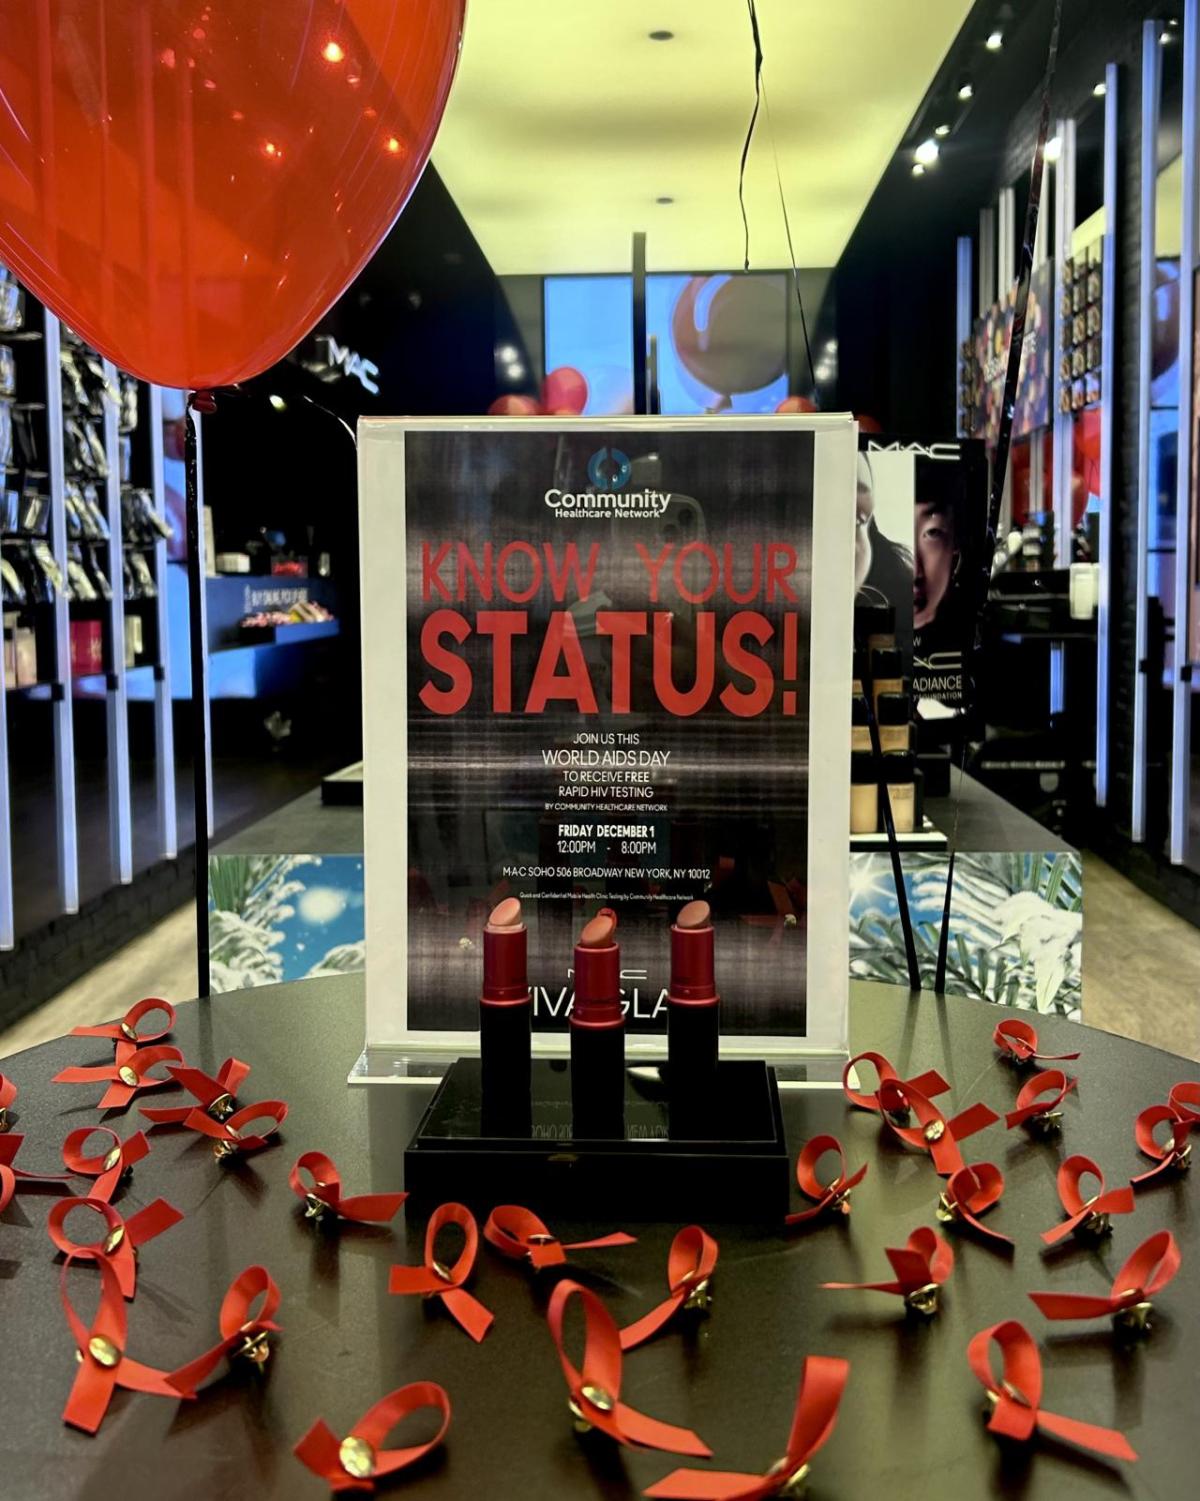 MAC in-store display table with red ribbons and a sign "Know your status".